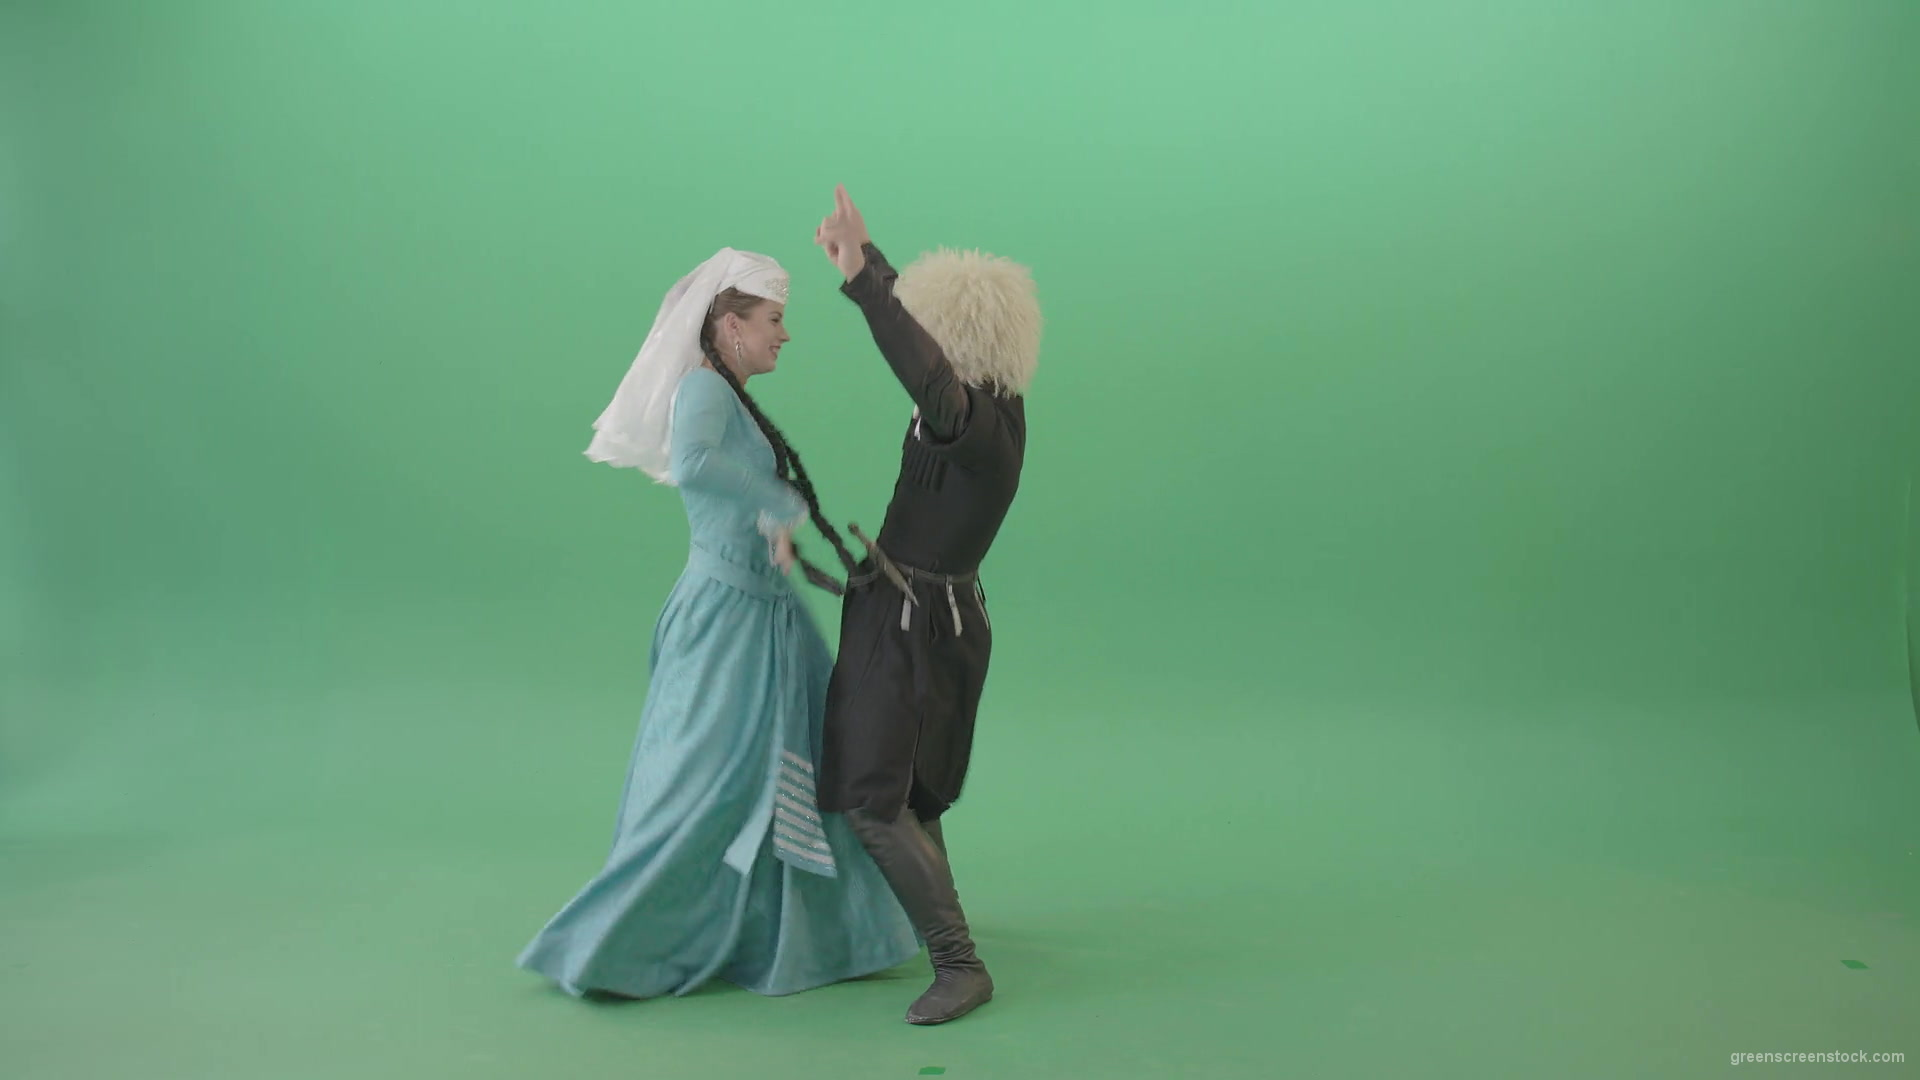 Gerogian-people-funny-dancing-with-smile-in-folk-dress-isolated-on-Green-Screen-4K-Video-Footage-1920_005 Green Screen Stock